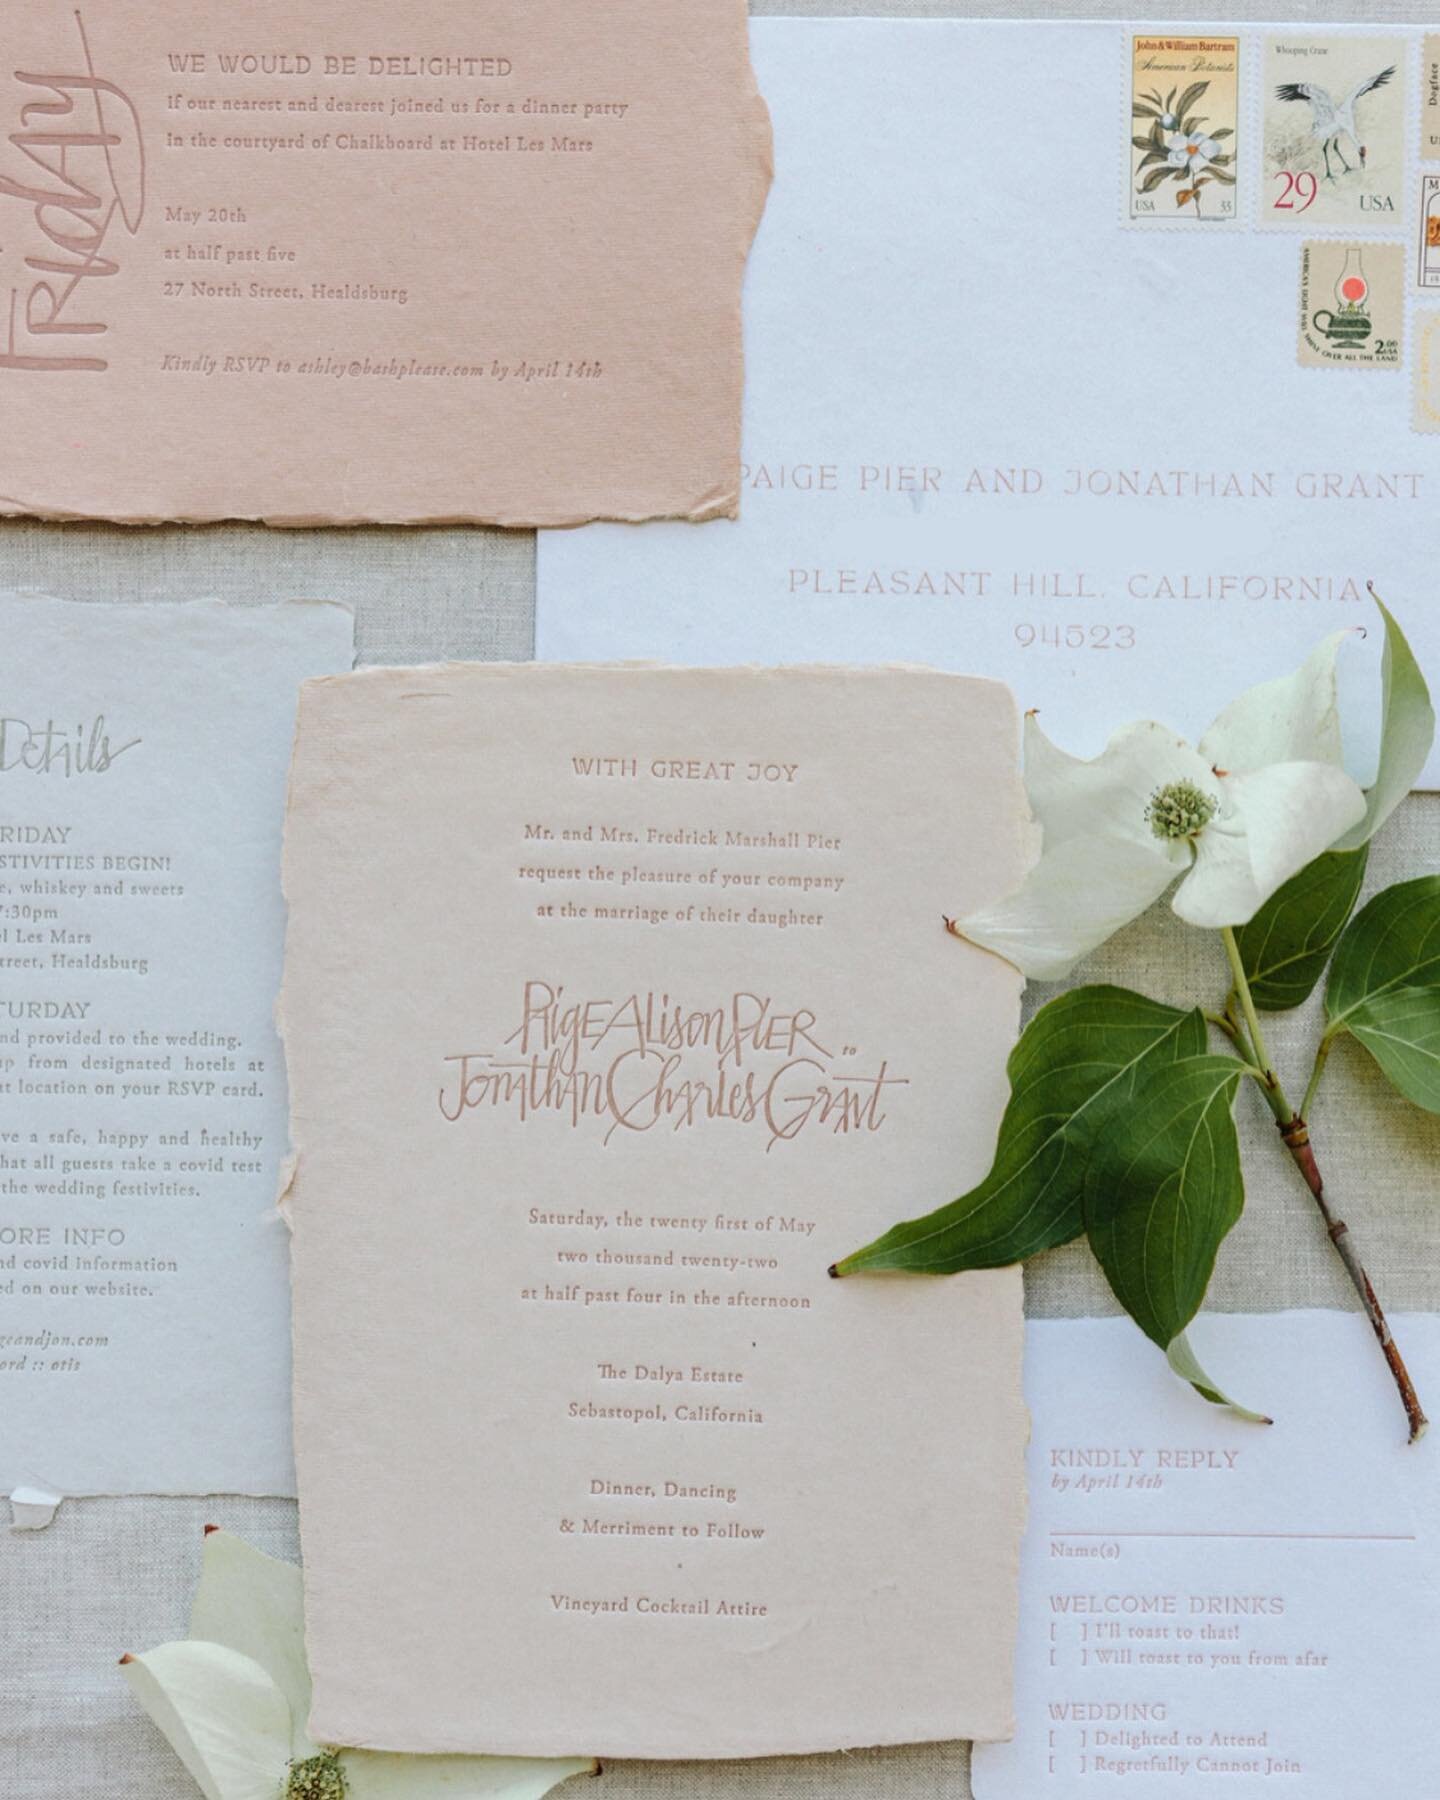 The sun is finally out to play! Dreaming of these spring garden details from P+J&rsquo;s wedding.